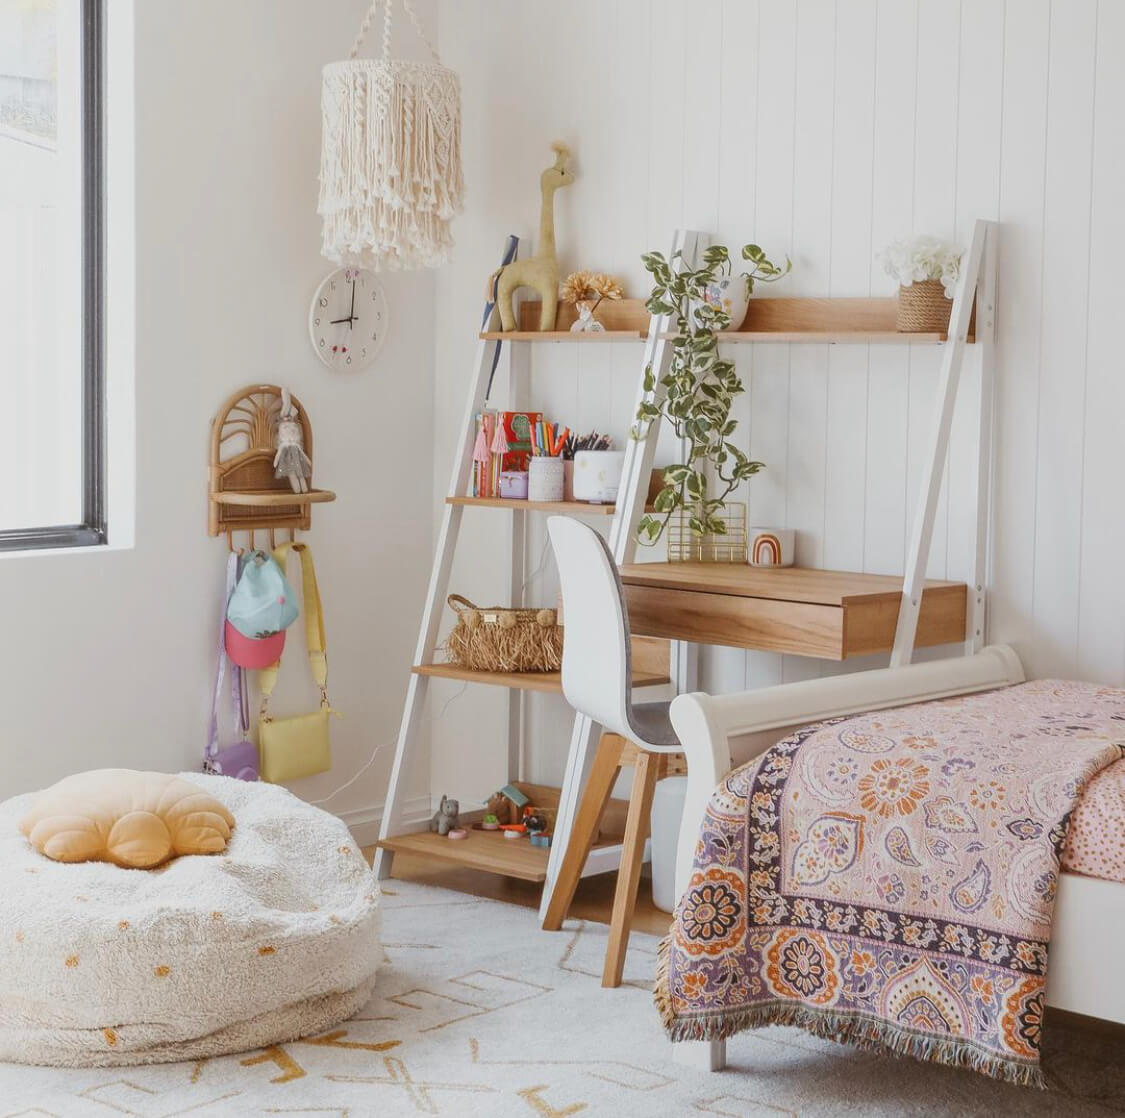 How to choose a rug for a kids room